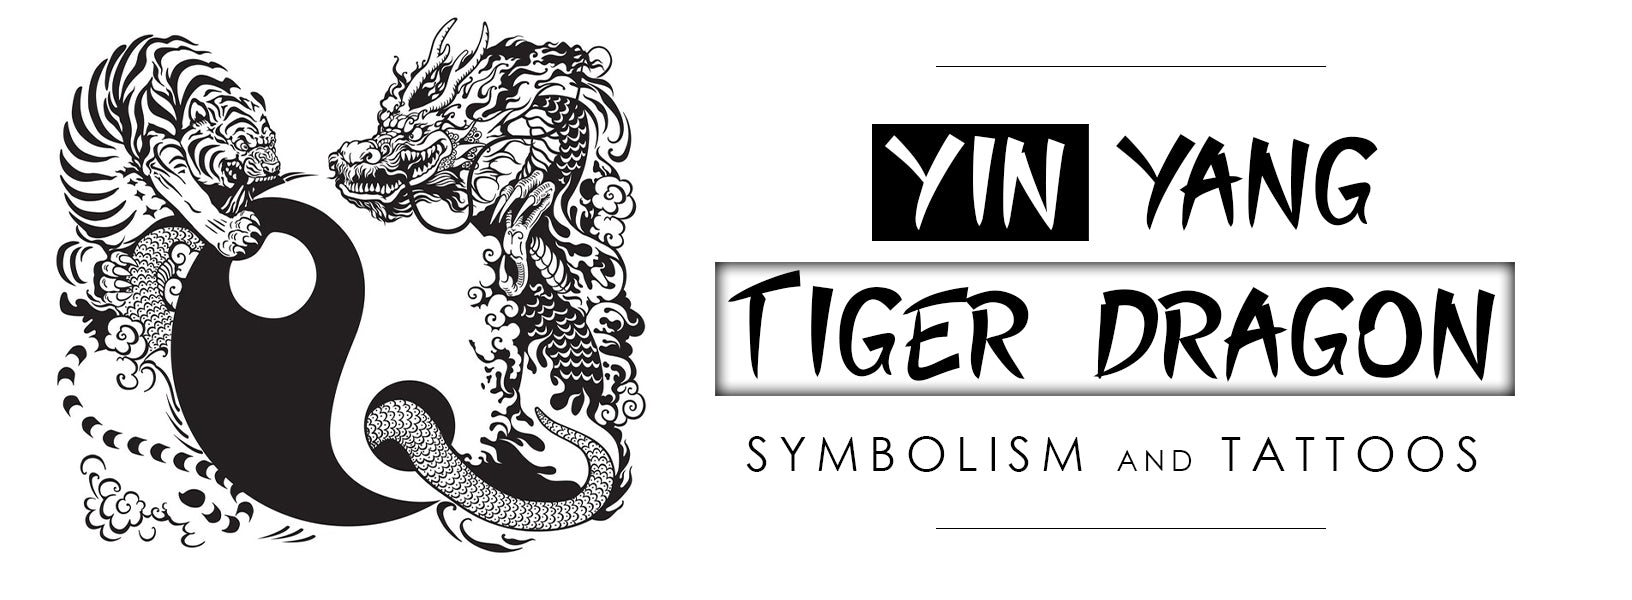 Tiger Symbol Can Use For Icon, Logo, T-shirt, Tattoo, Etc. Royalty Free  SVG, Cliparts, Vectors, and Stock Illustration. Image 34600926.